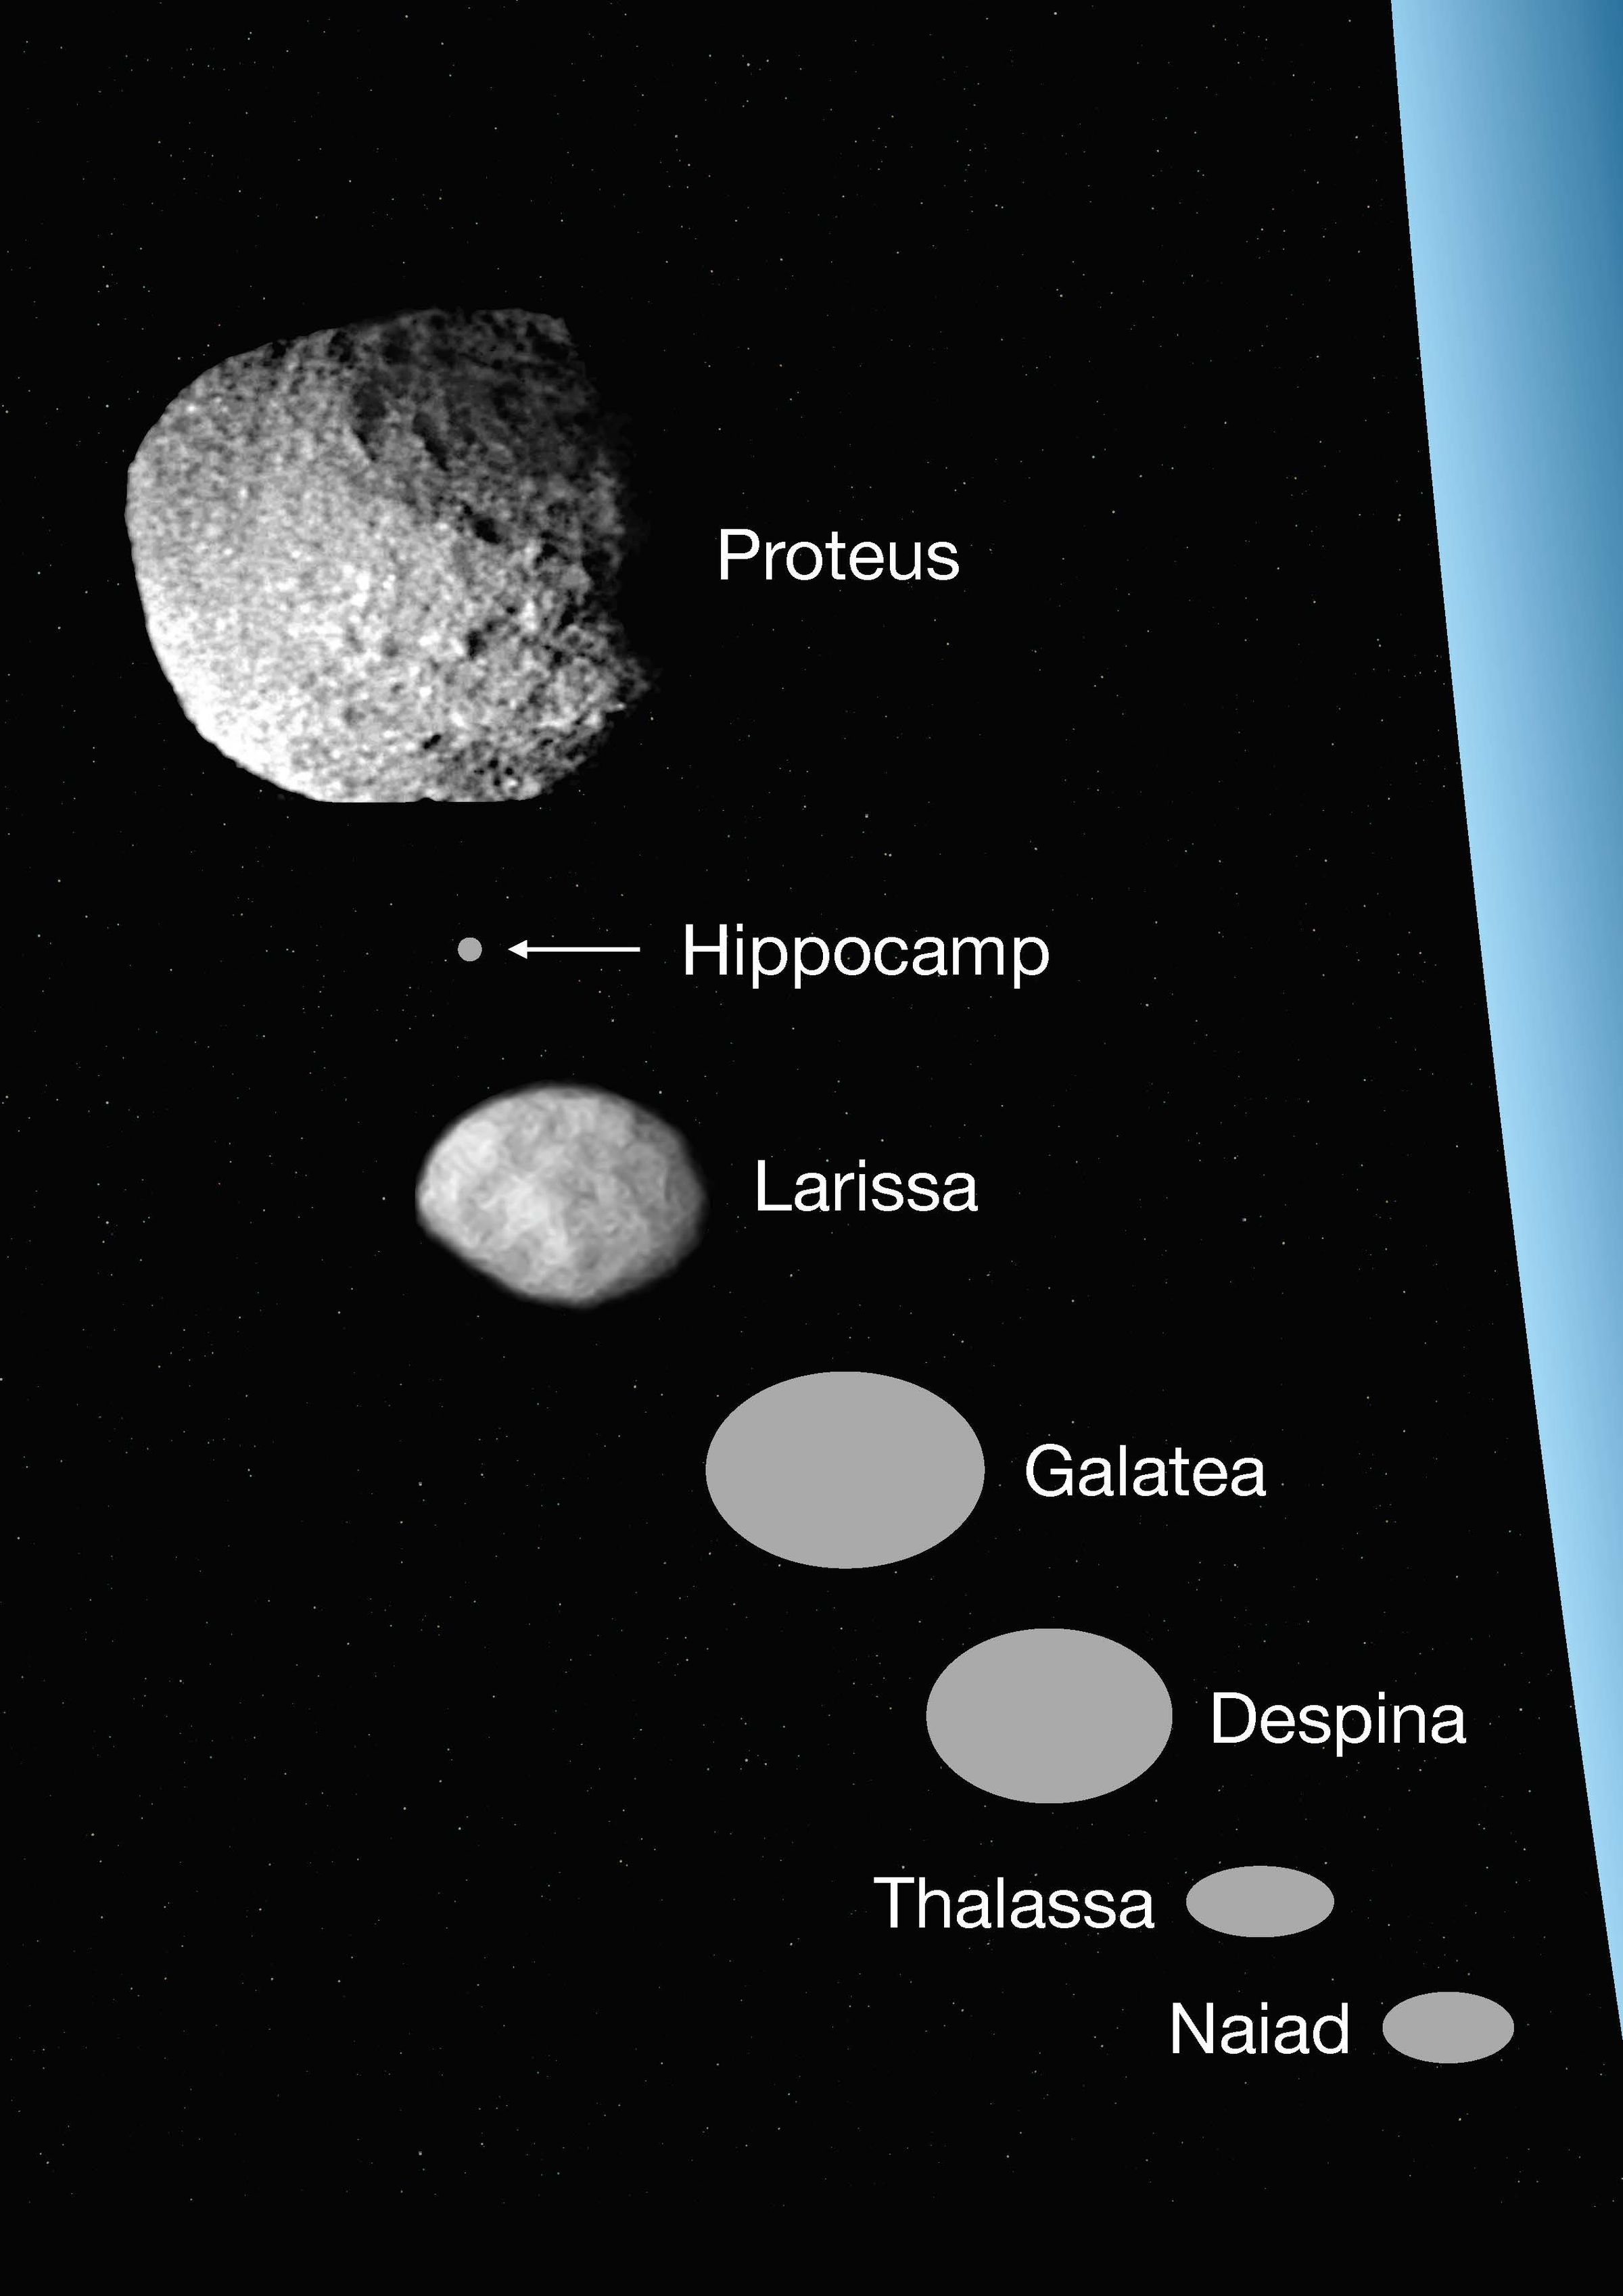 Relative size comparisons of Neptune’s moons, including Hippocamp.